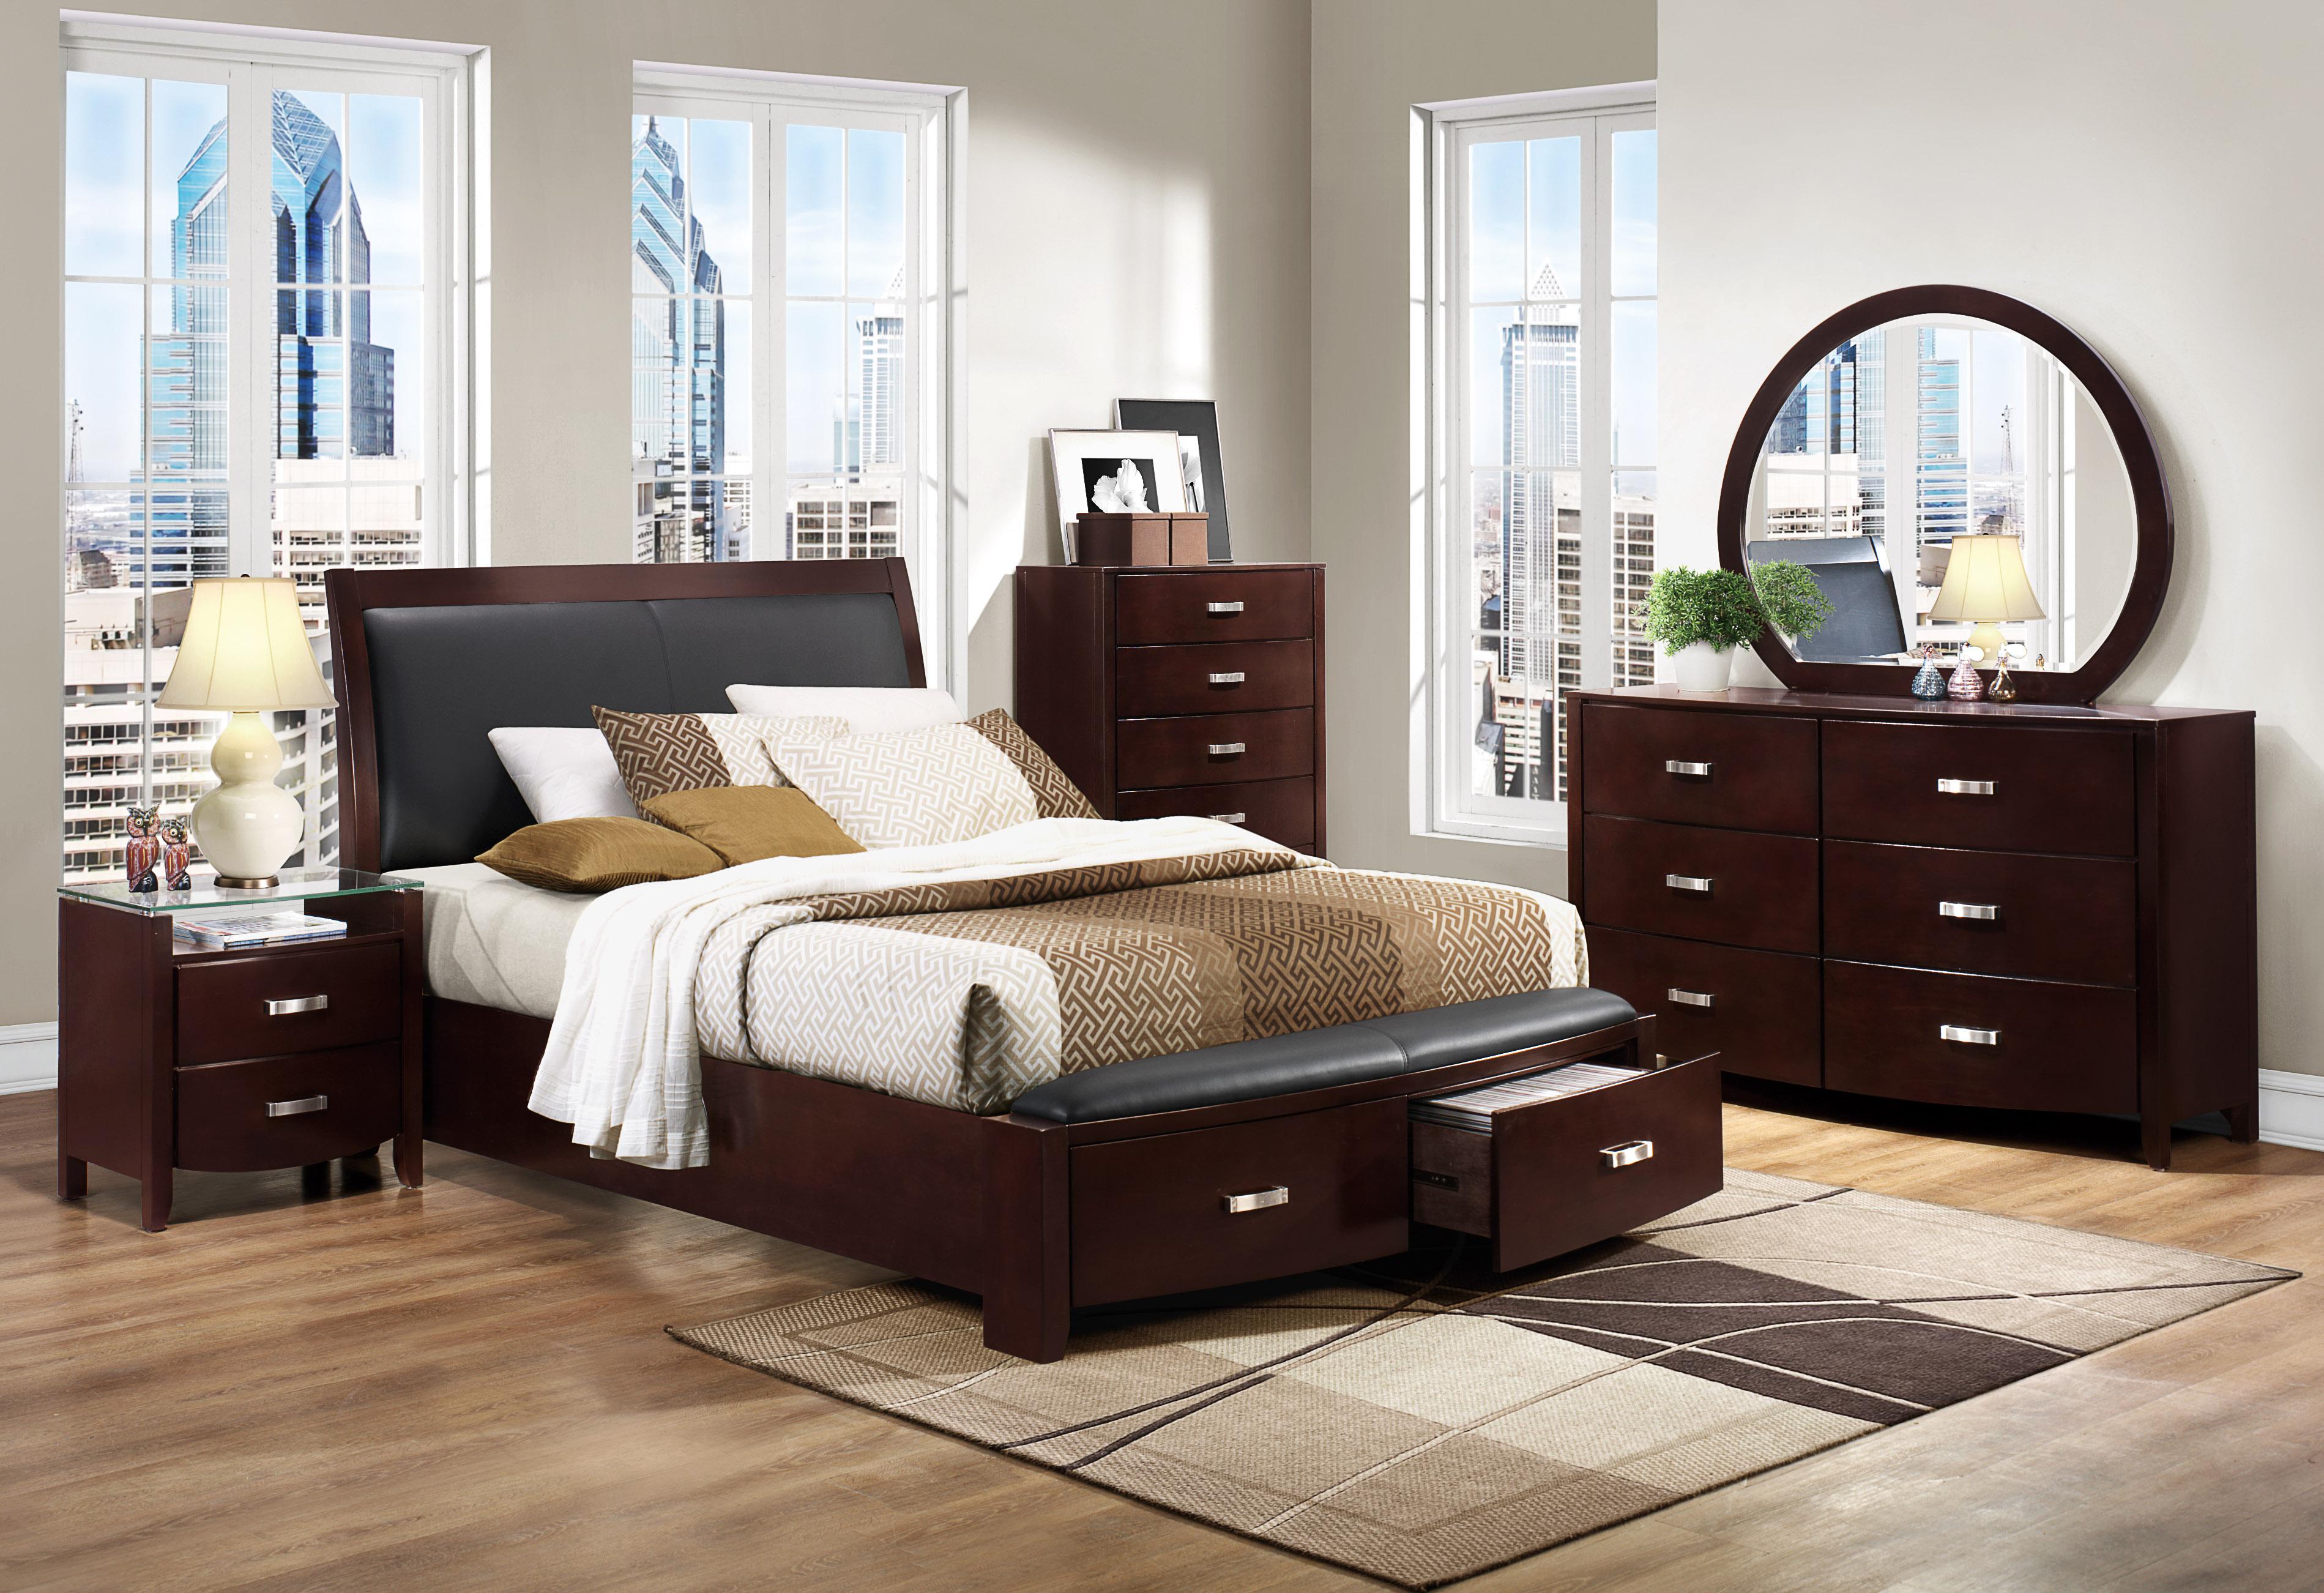 Contemporary Bedroom Set 1737KNC-1CK-6PC Lyric 1737KNC-1CK-6PC in Dark Cherry Faux Leather